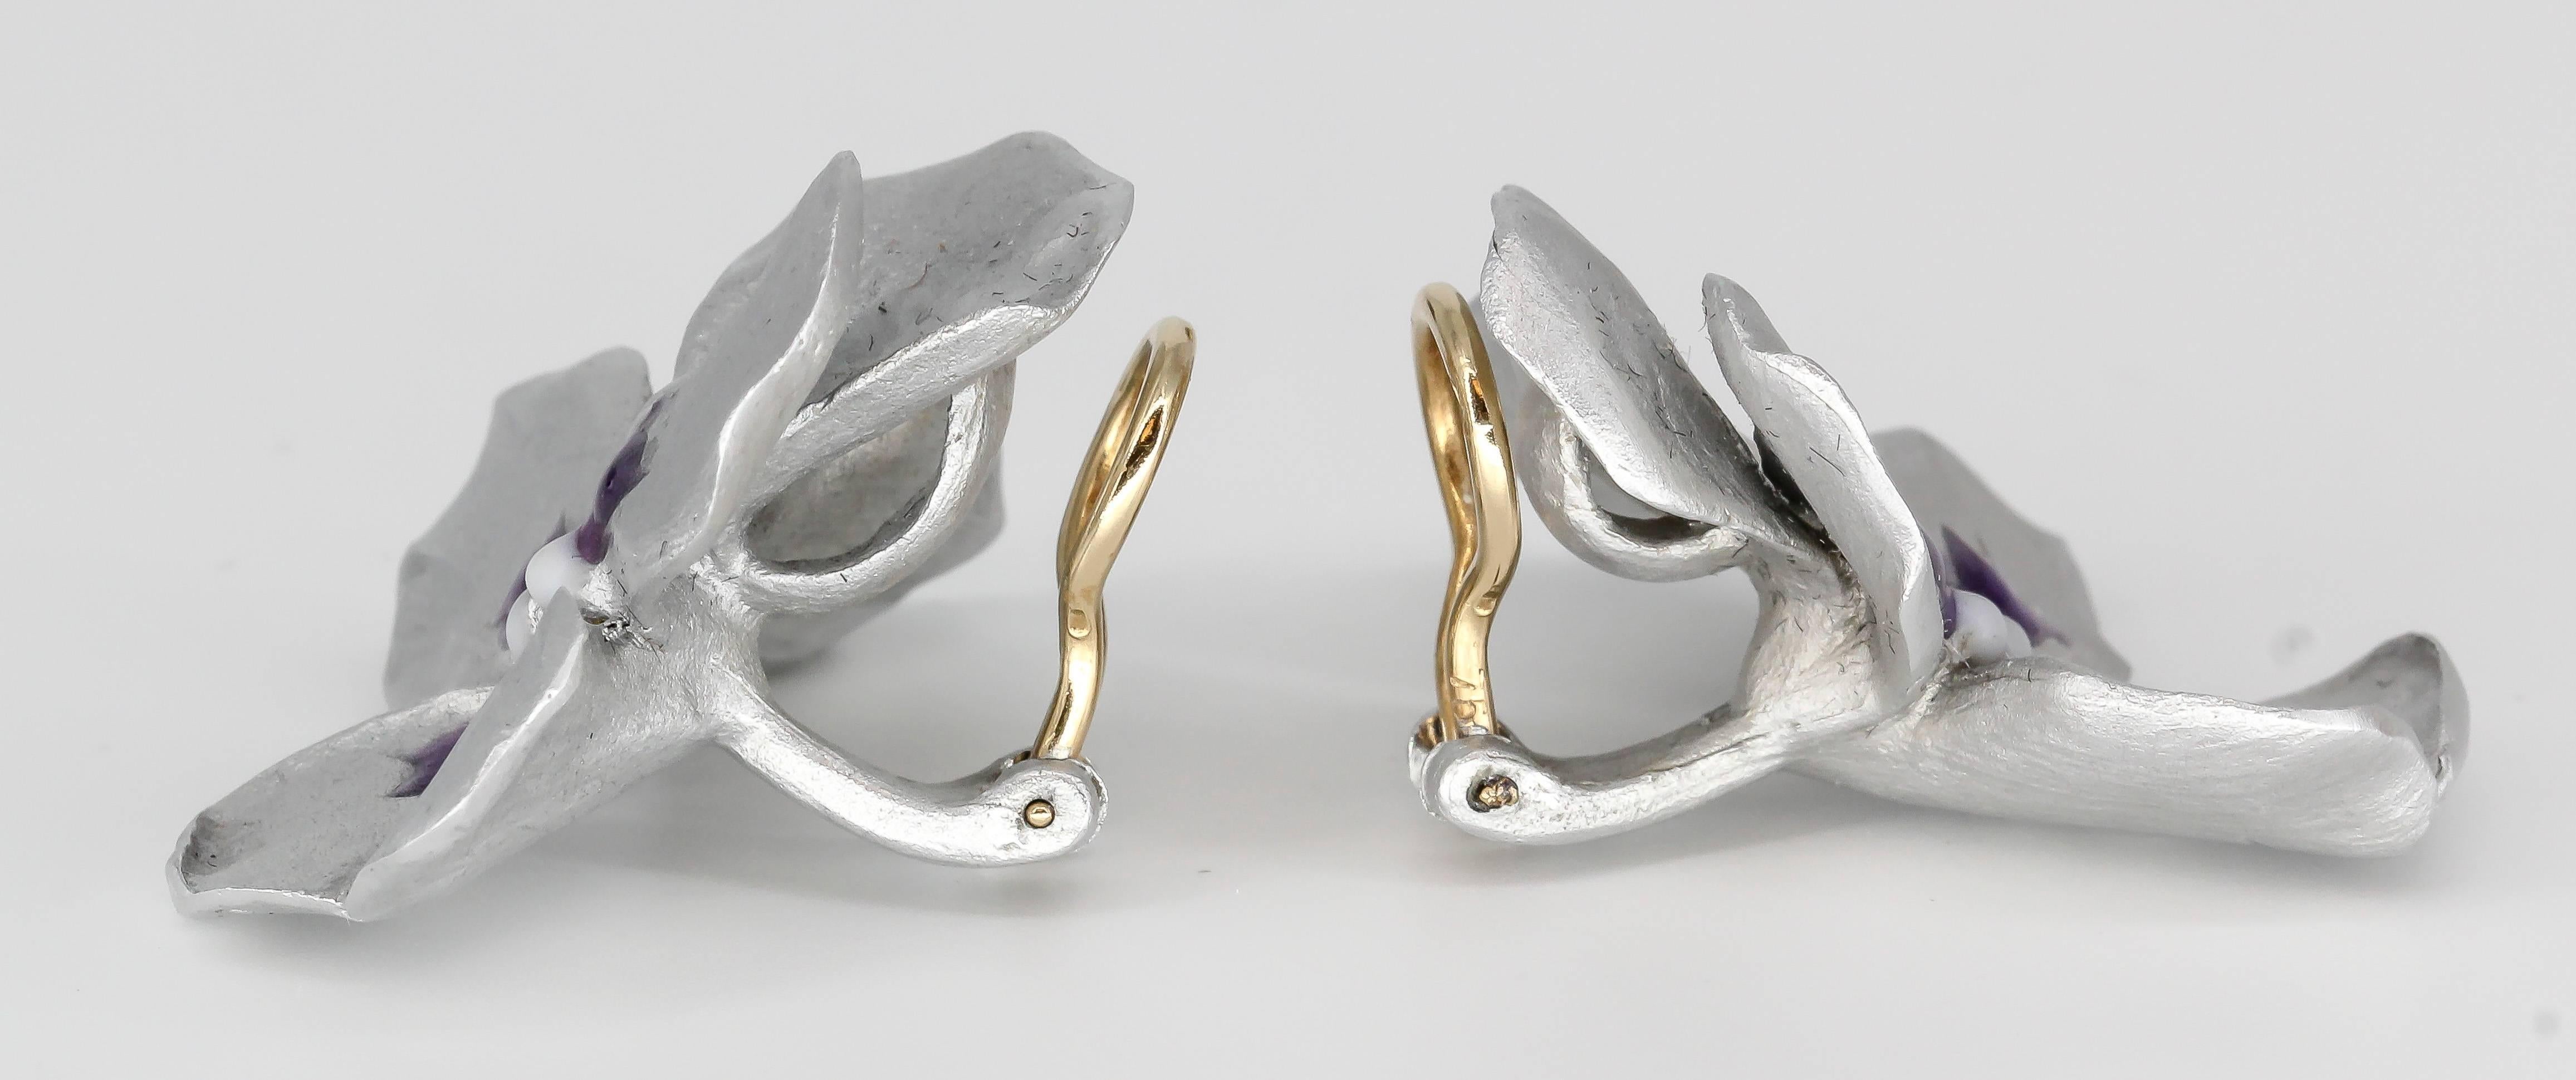 Unusual titanium and gold earrings by JAR. They feature an unusual design which resembles flower petals. Beautifully made and easy to wear anywhere.

Hallmarks: Jar.